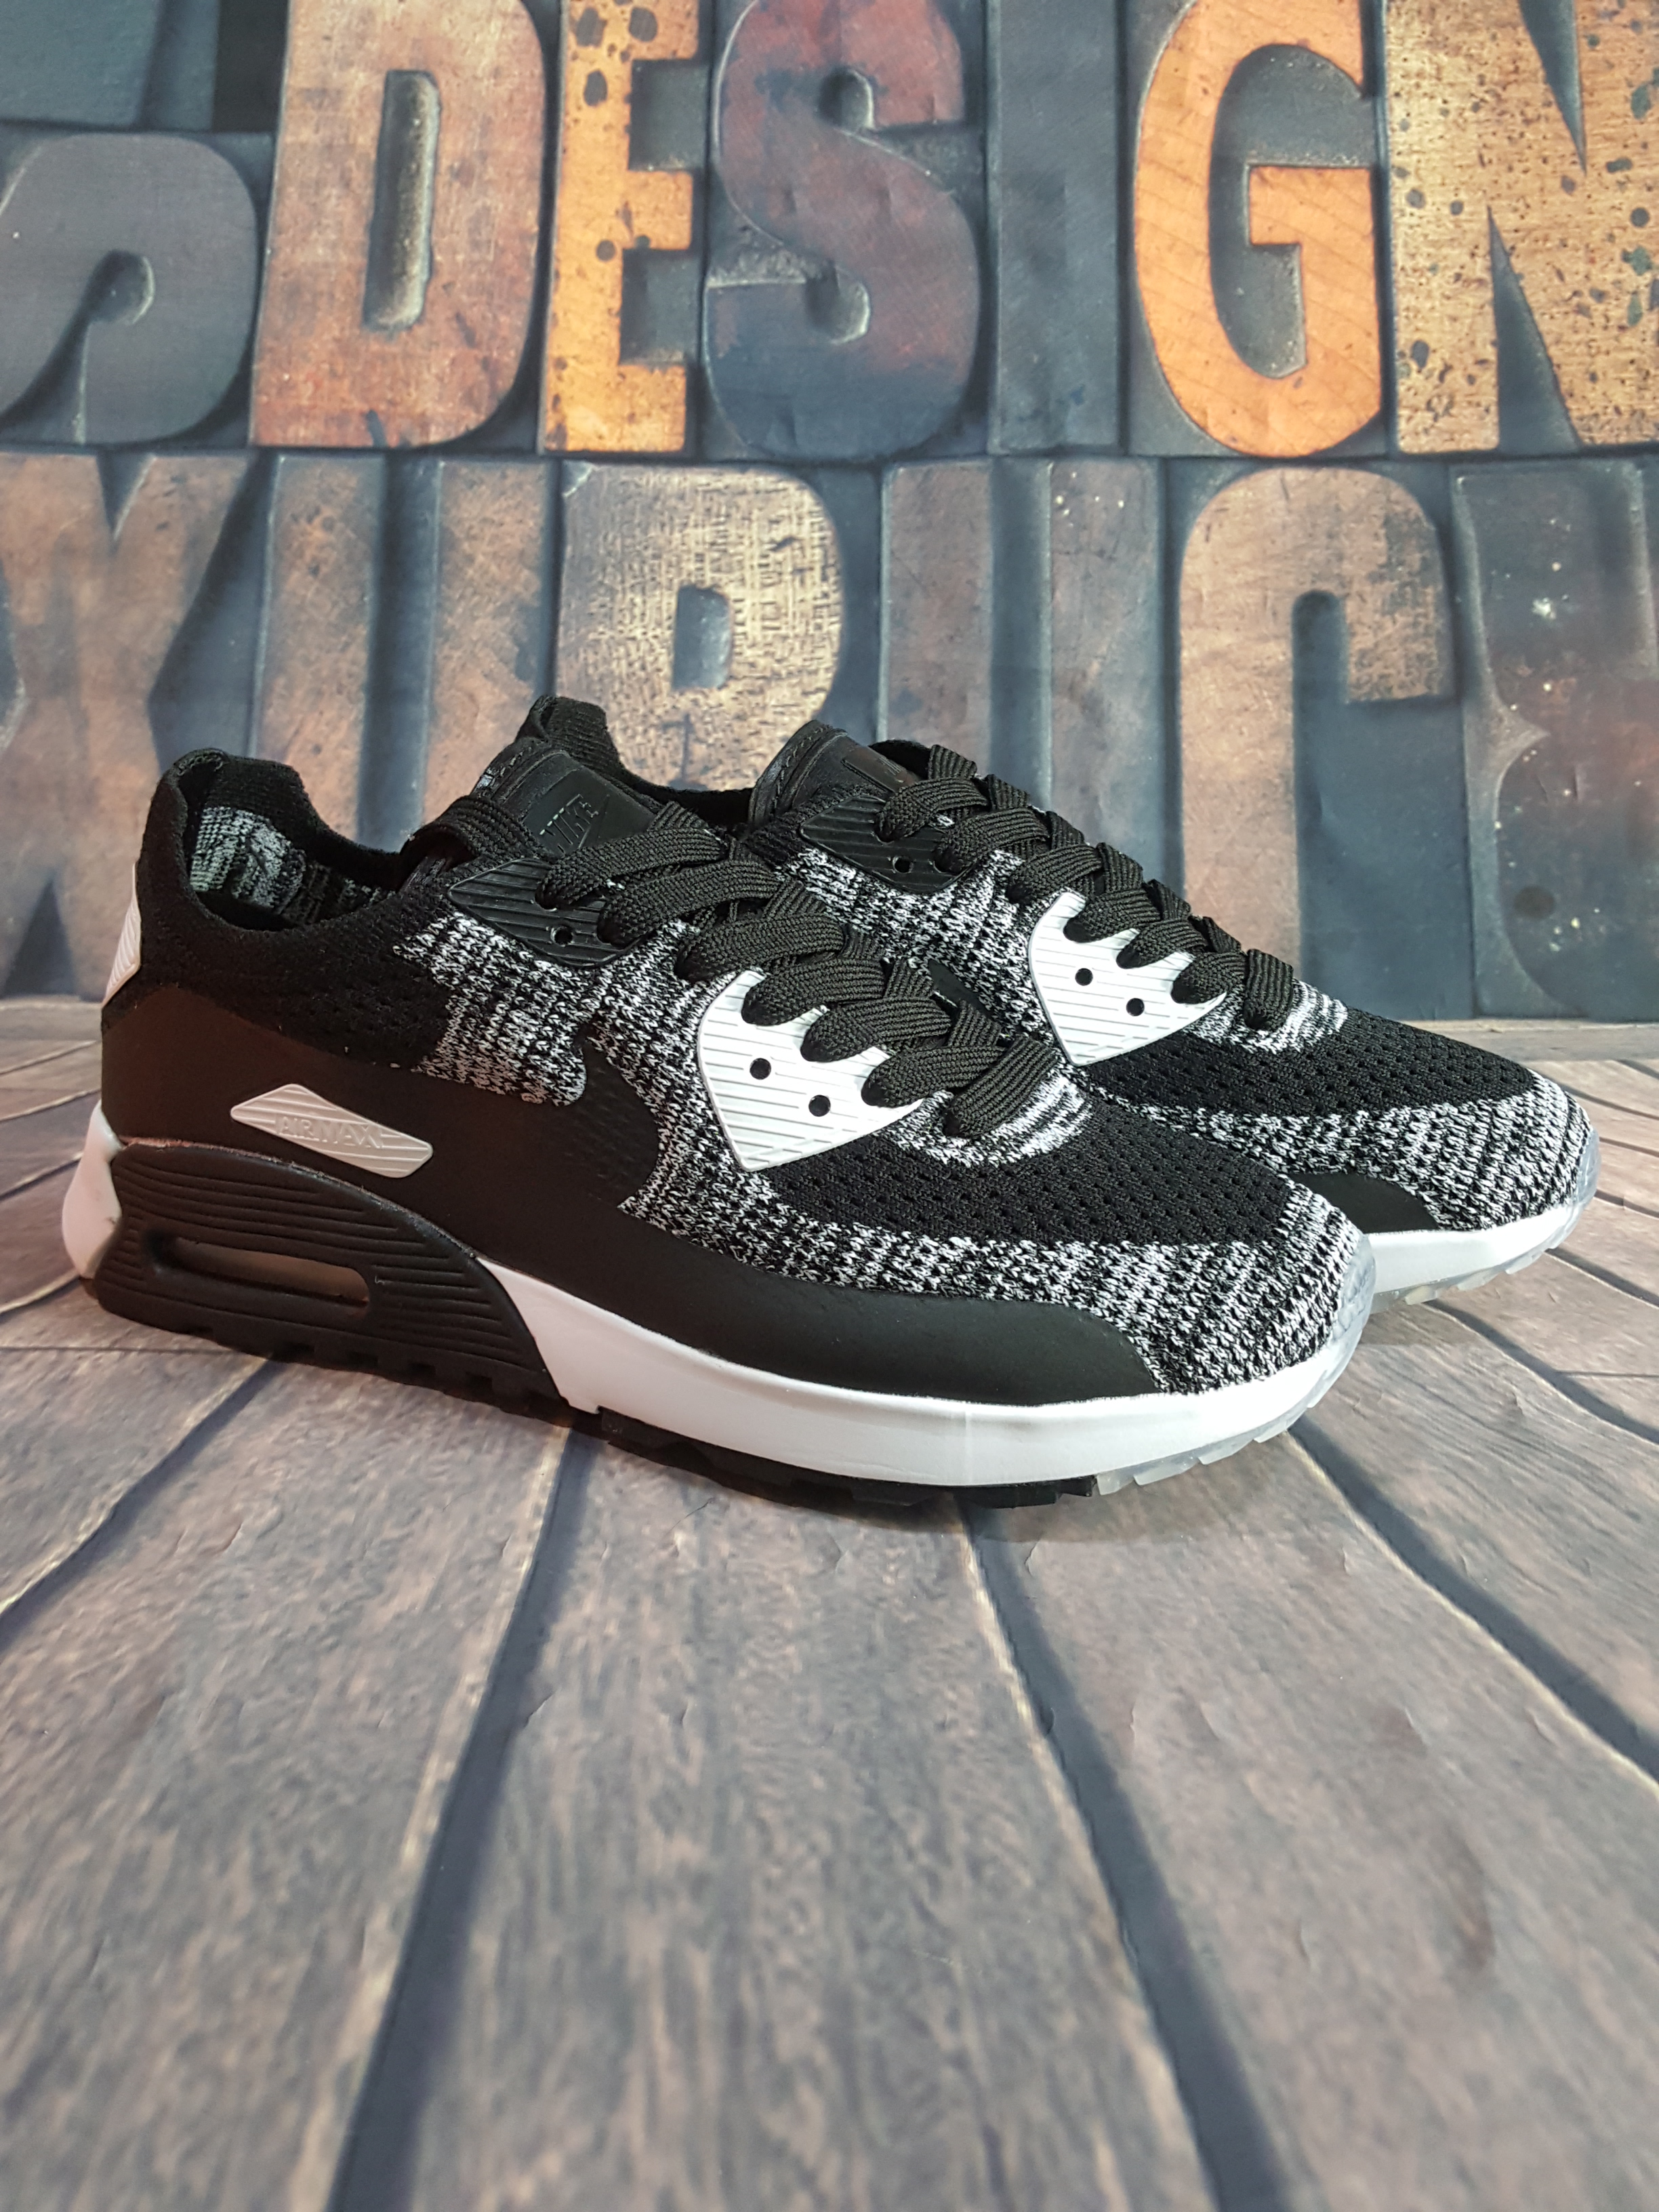 Nike Air Max 90 Flyknit Black White Shoes